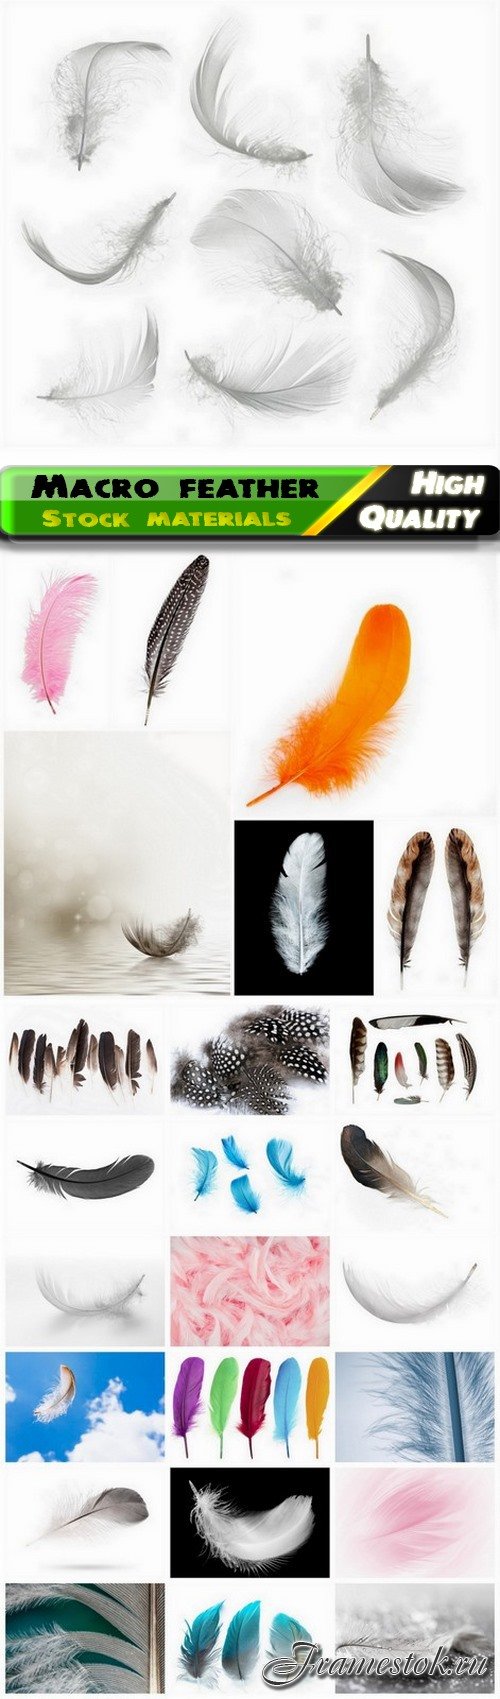 Macro feather and colored feathers of different birds 25 HQ Jpg